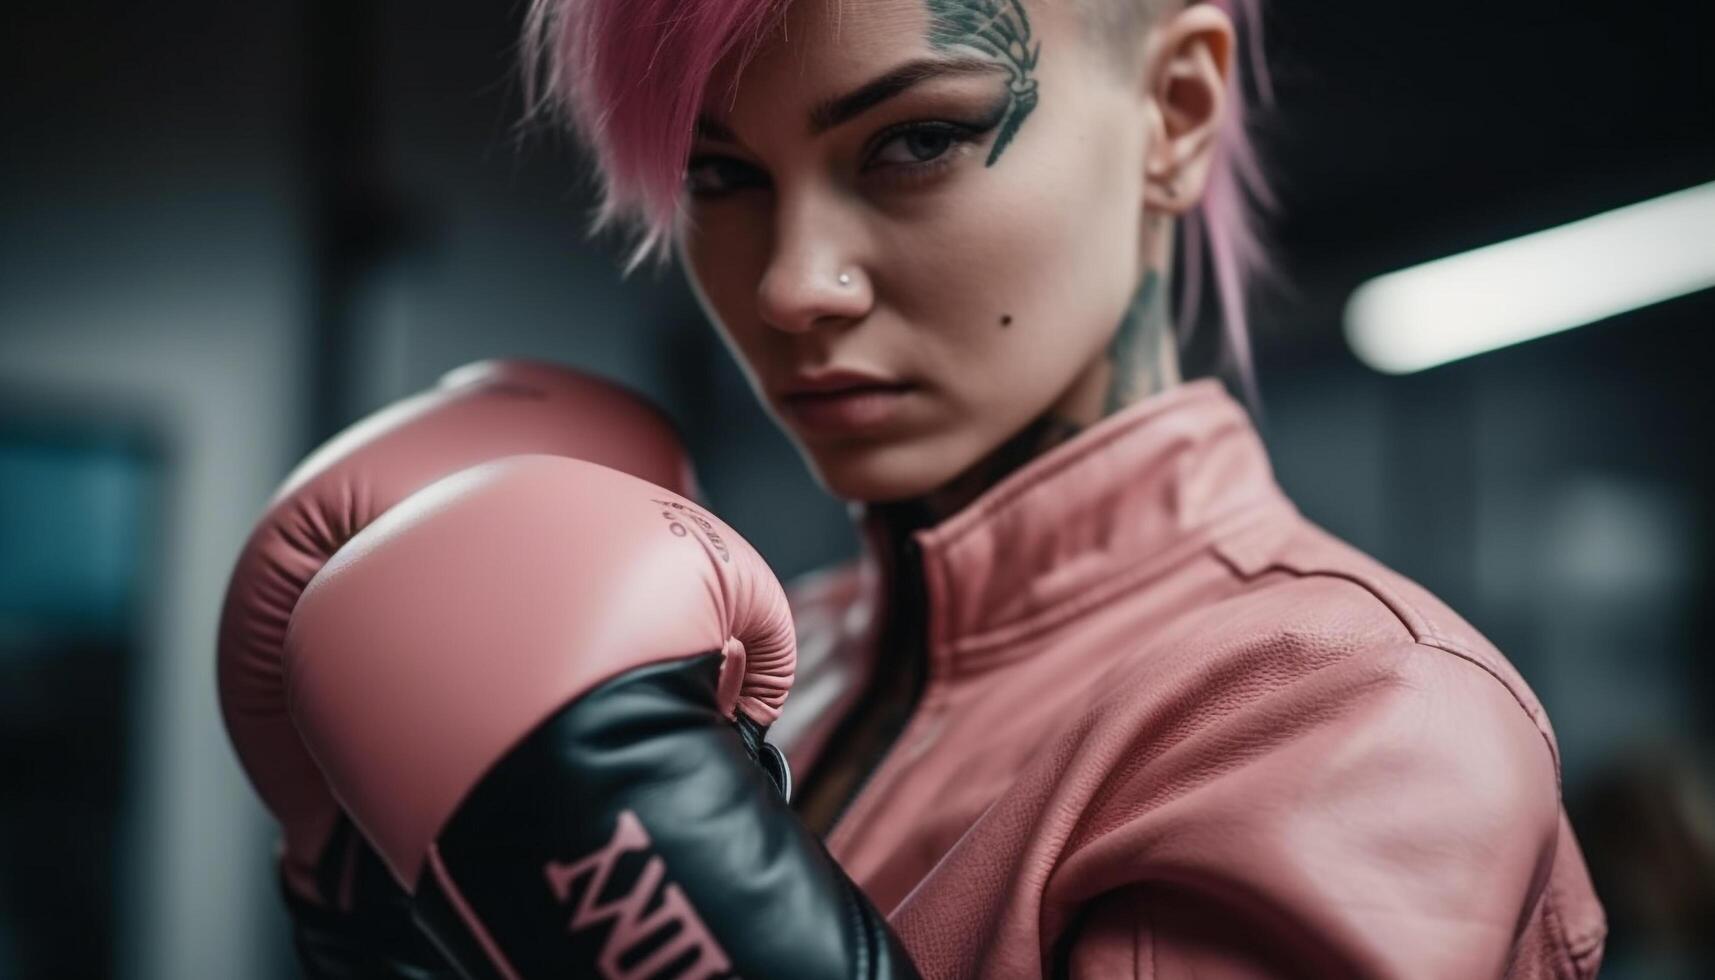 Confident young woman in sports clothing punching with determination indoors photo